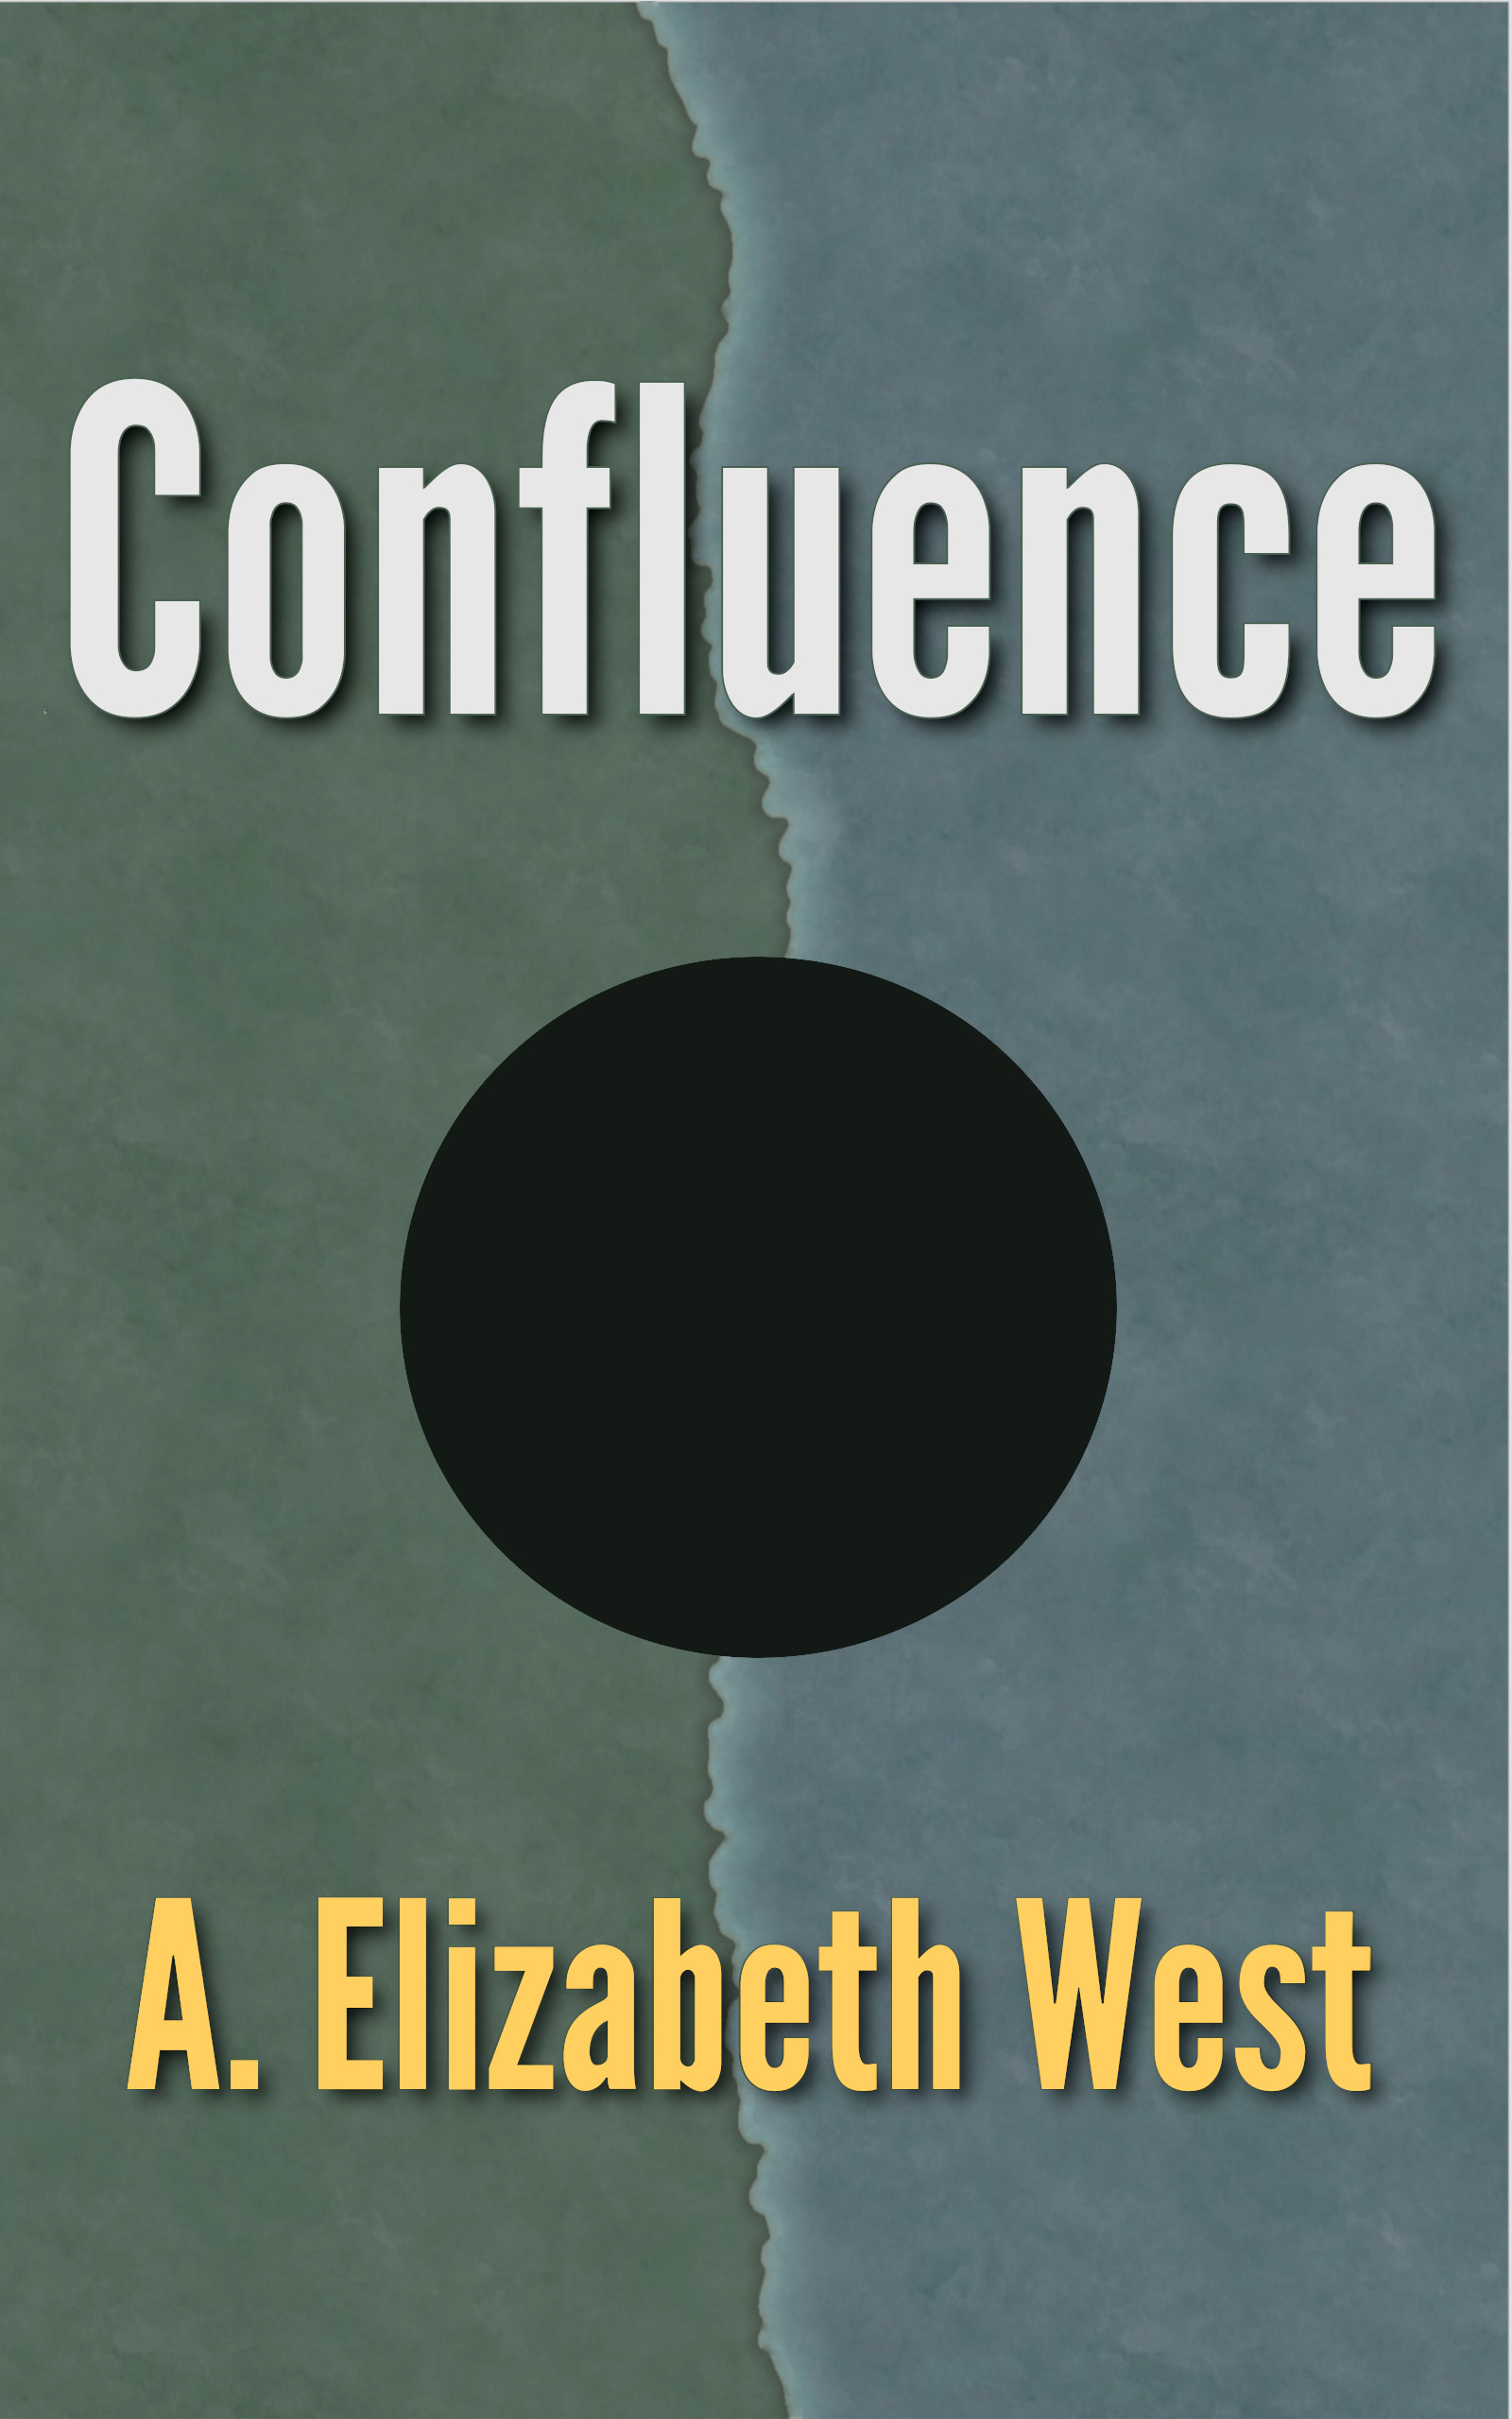 Confluence book cover, background in green and blue with a large black hole in the center, bisected by a glowing line. Title in large white font above the hole and author name below in light yellow font.